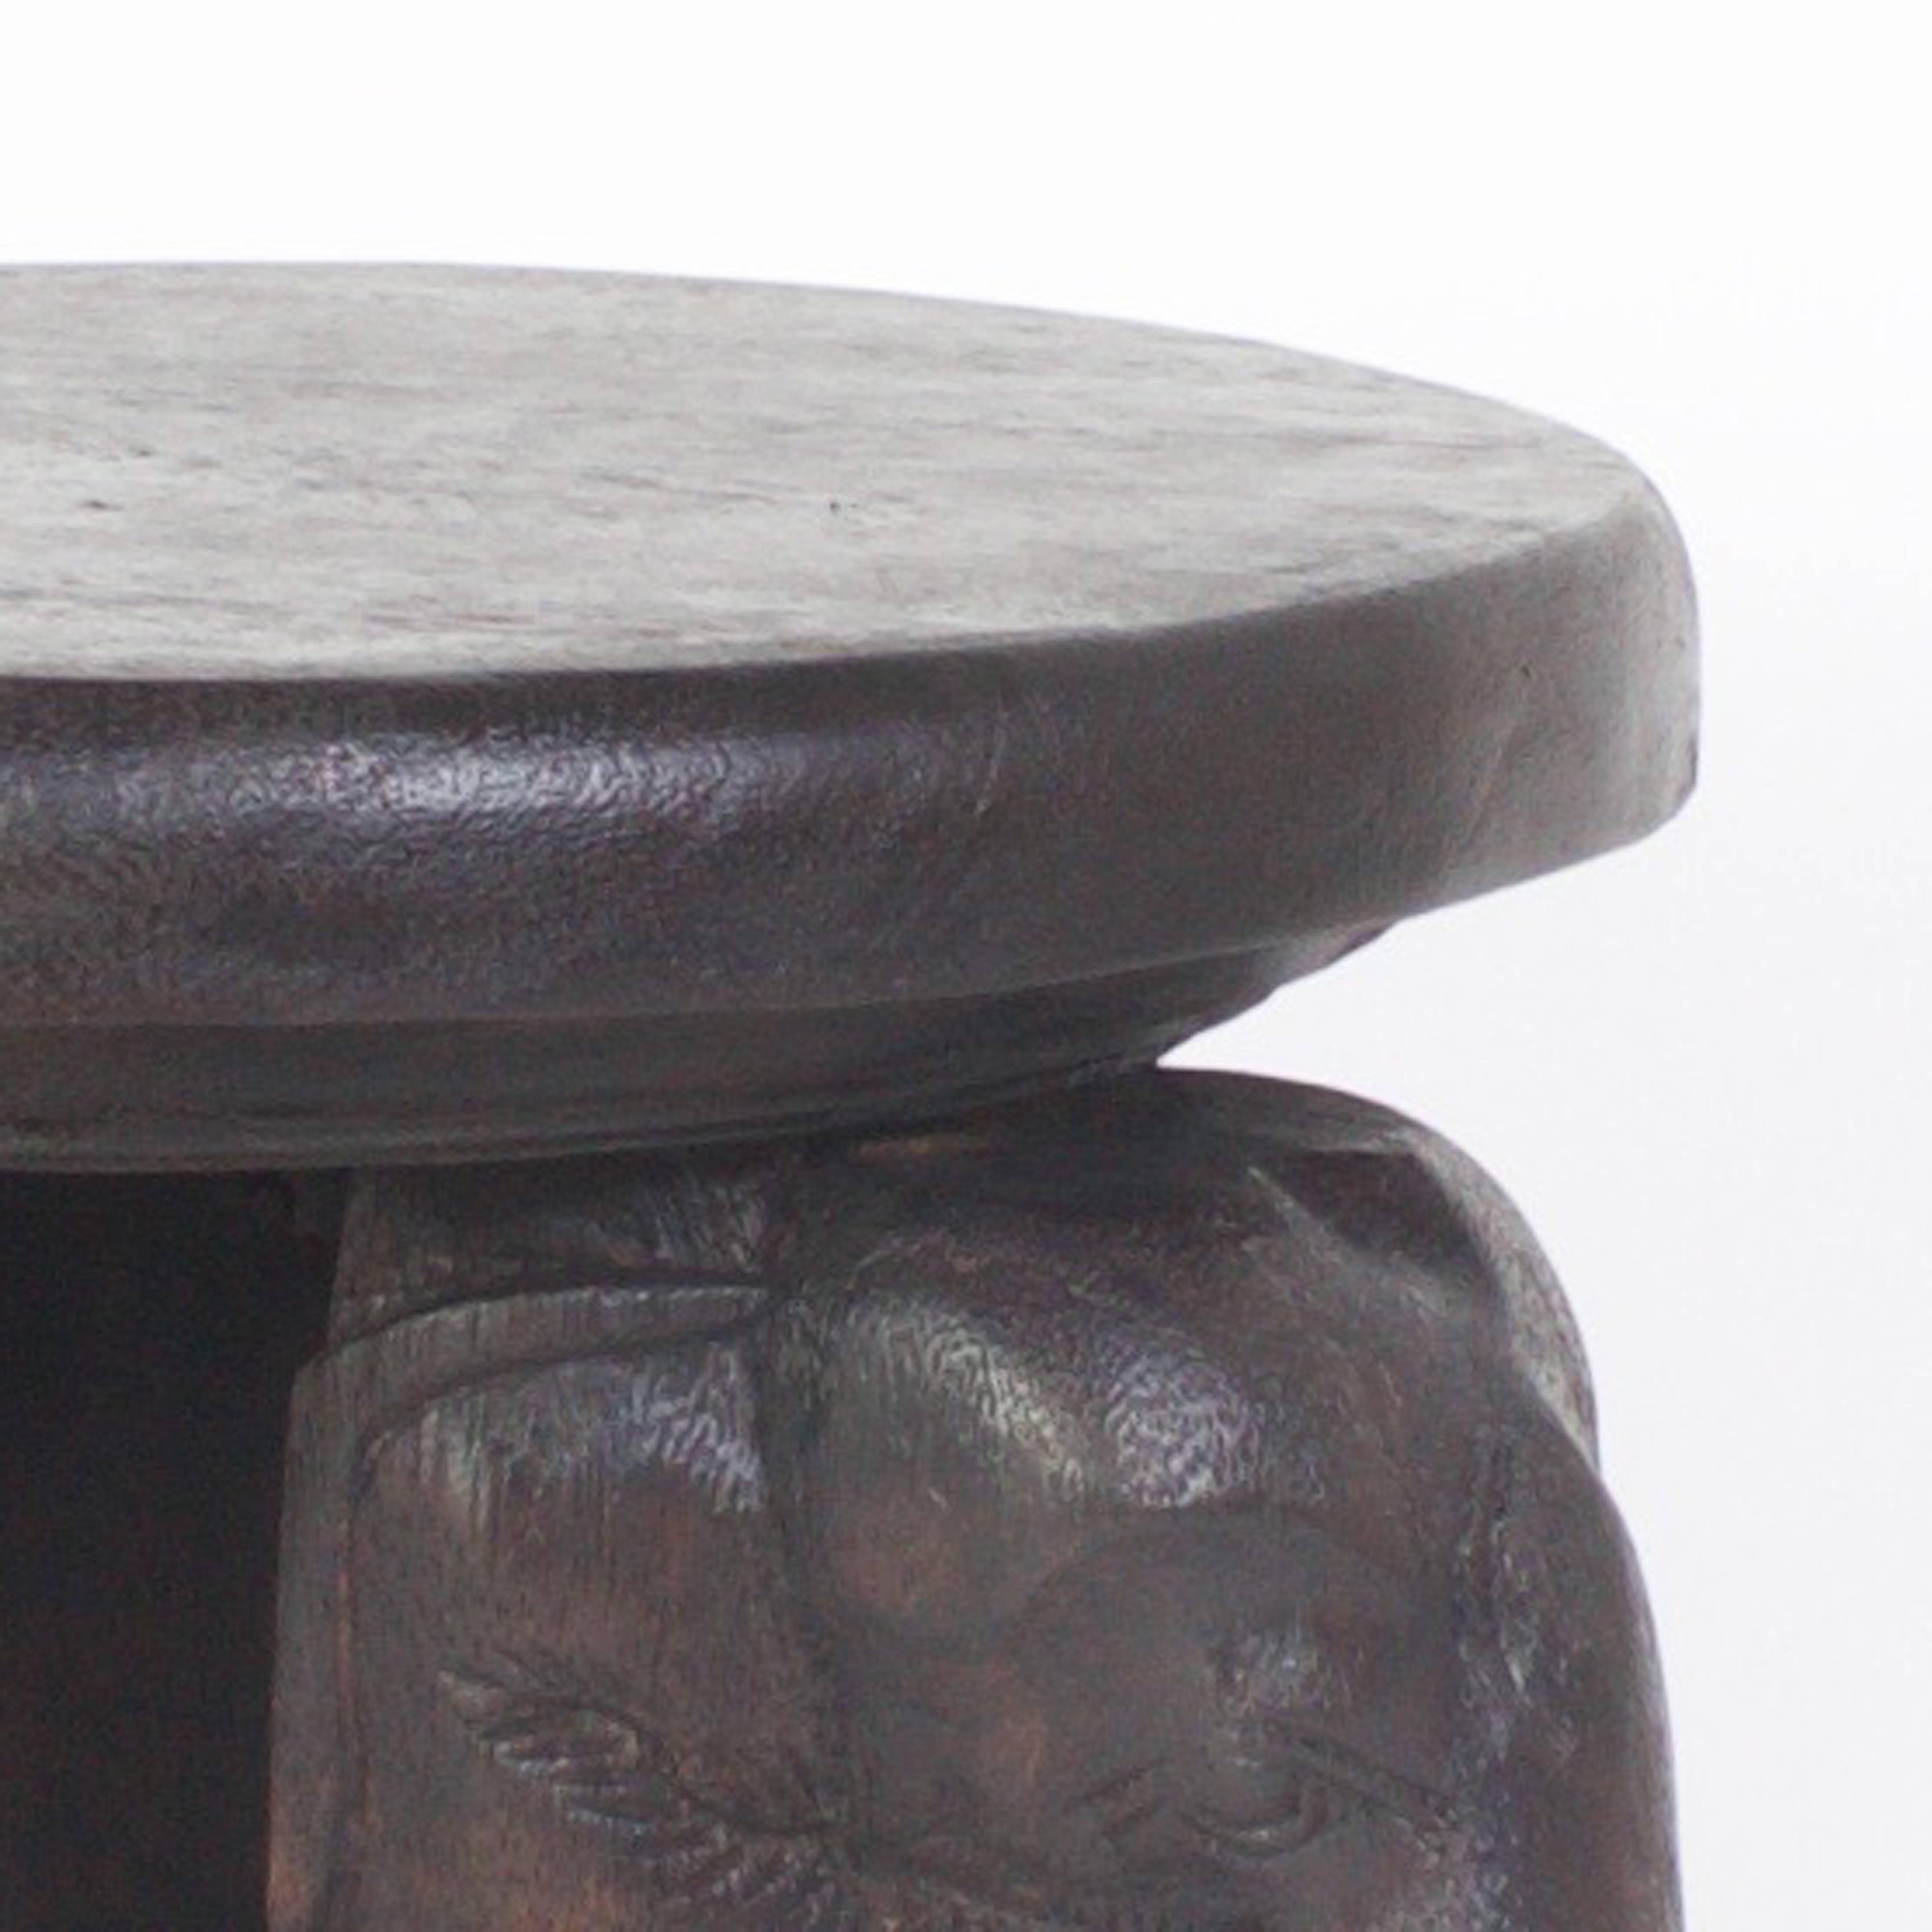 20th Century Pair of Elephant Tables, Carved Hardwood Anglo-Indian Style with a Folky Vibe